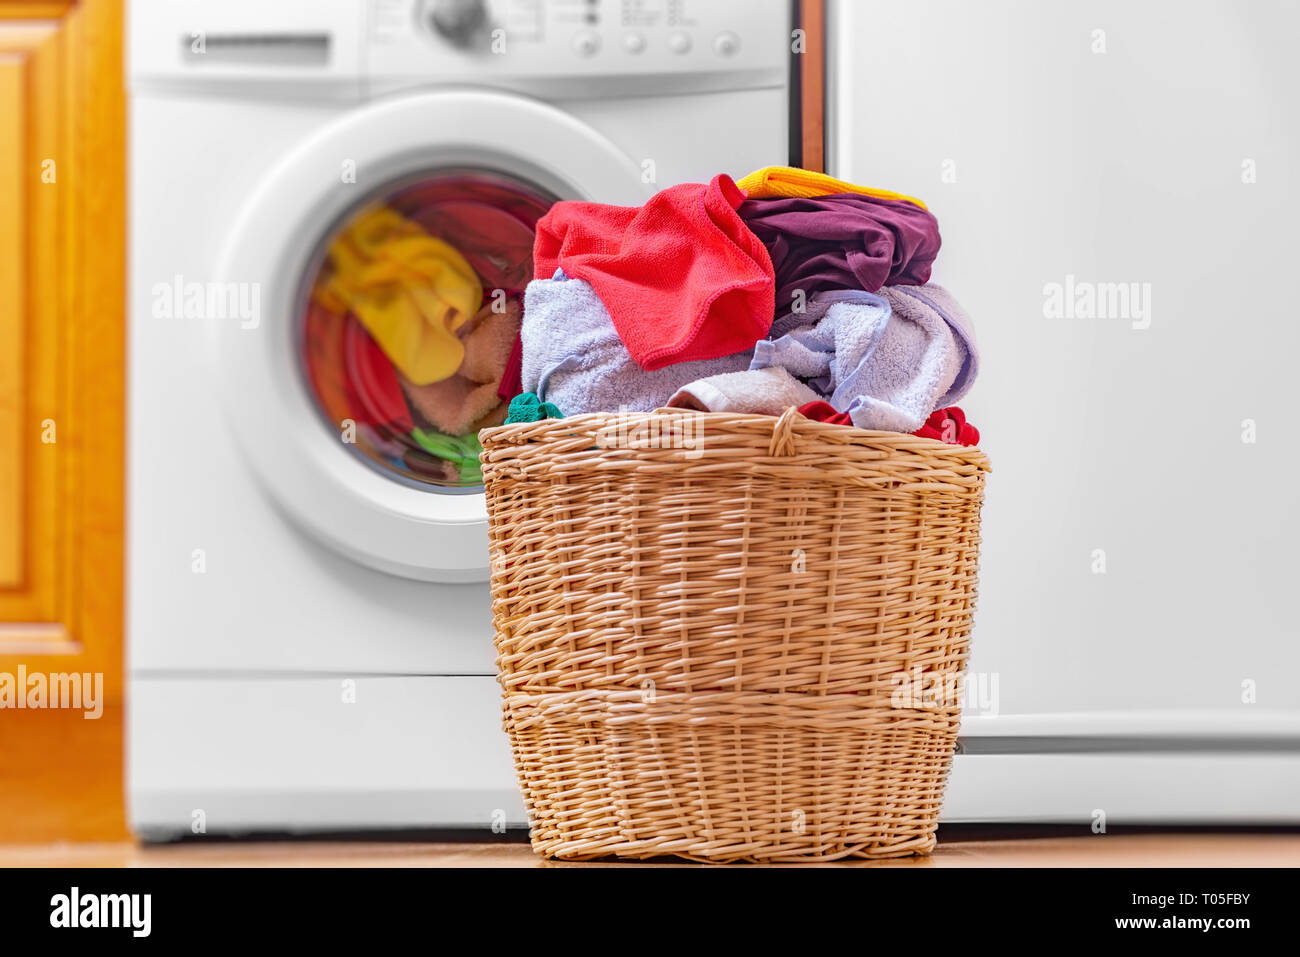 40+ Stuck In Laundry Machine Stock Photos, Pictures & Royalty-Free Images -  iStock